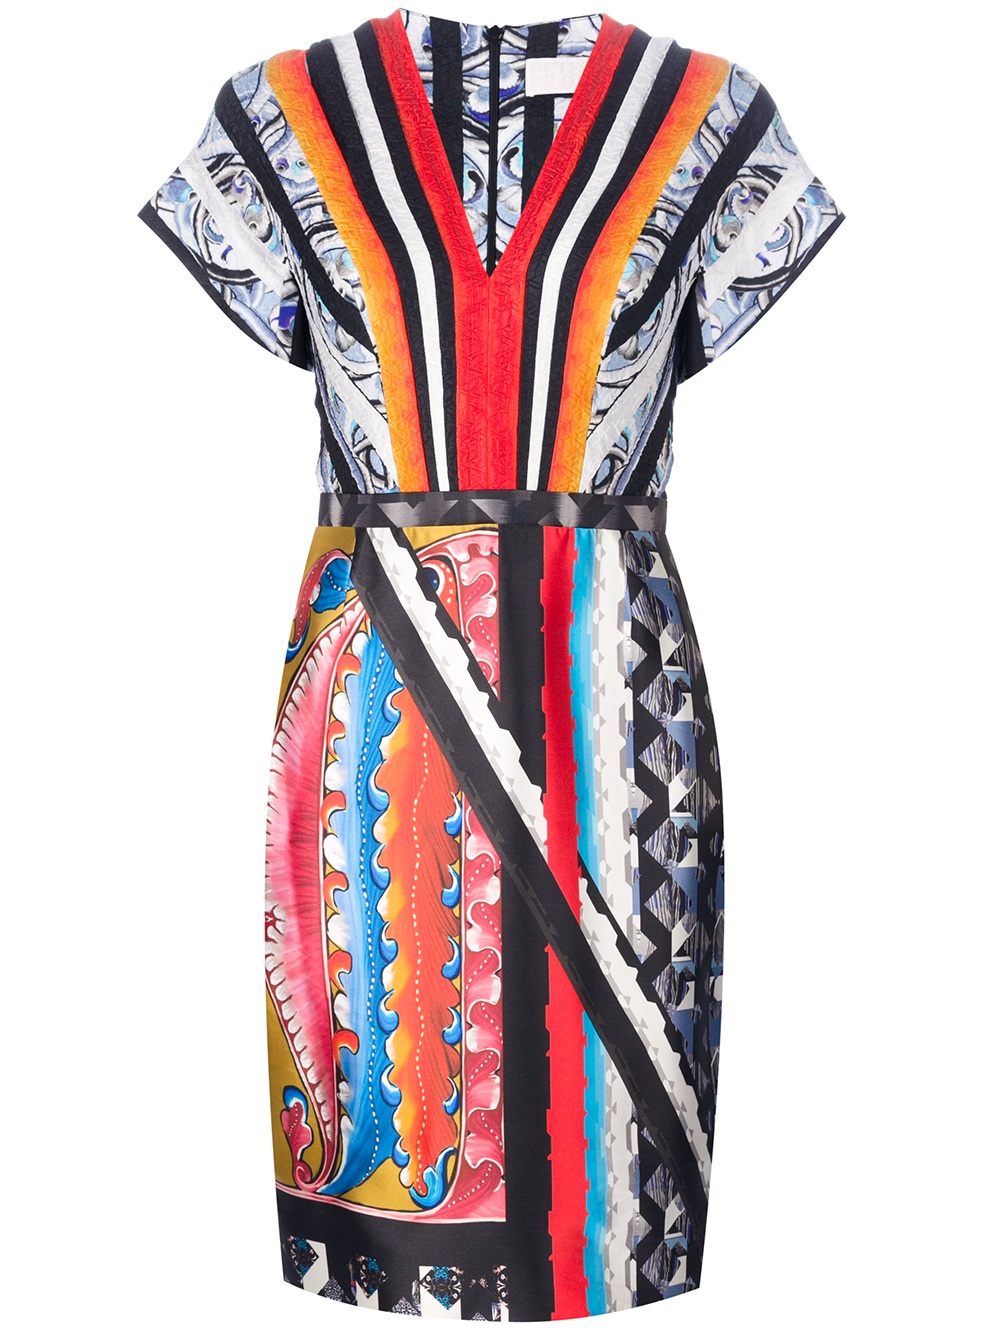 Peter pilotto Floral Tiered Dress in Red | Lyst